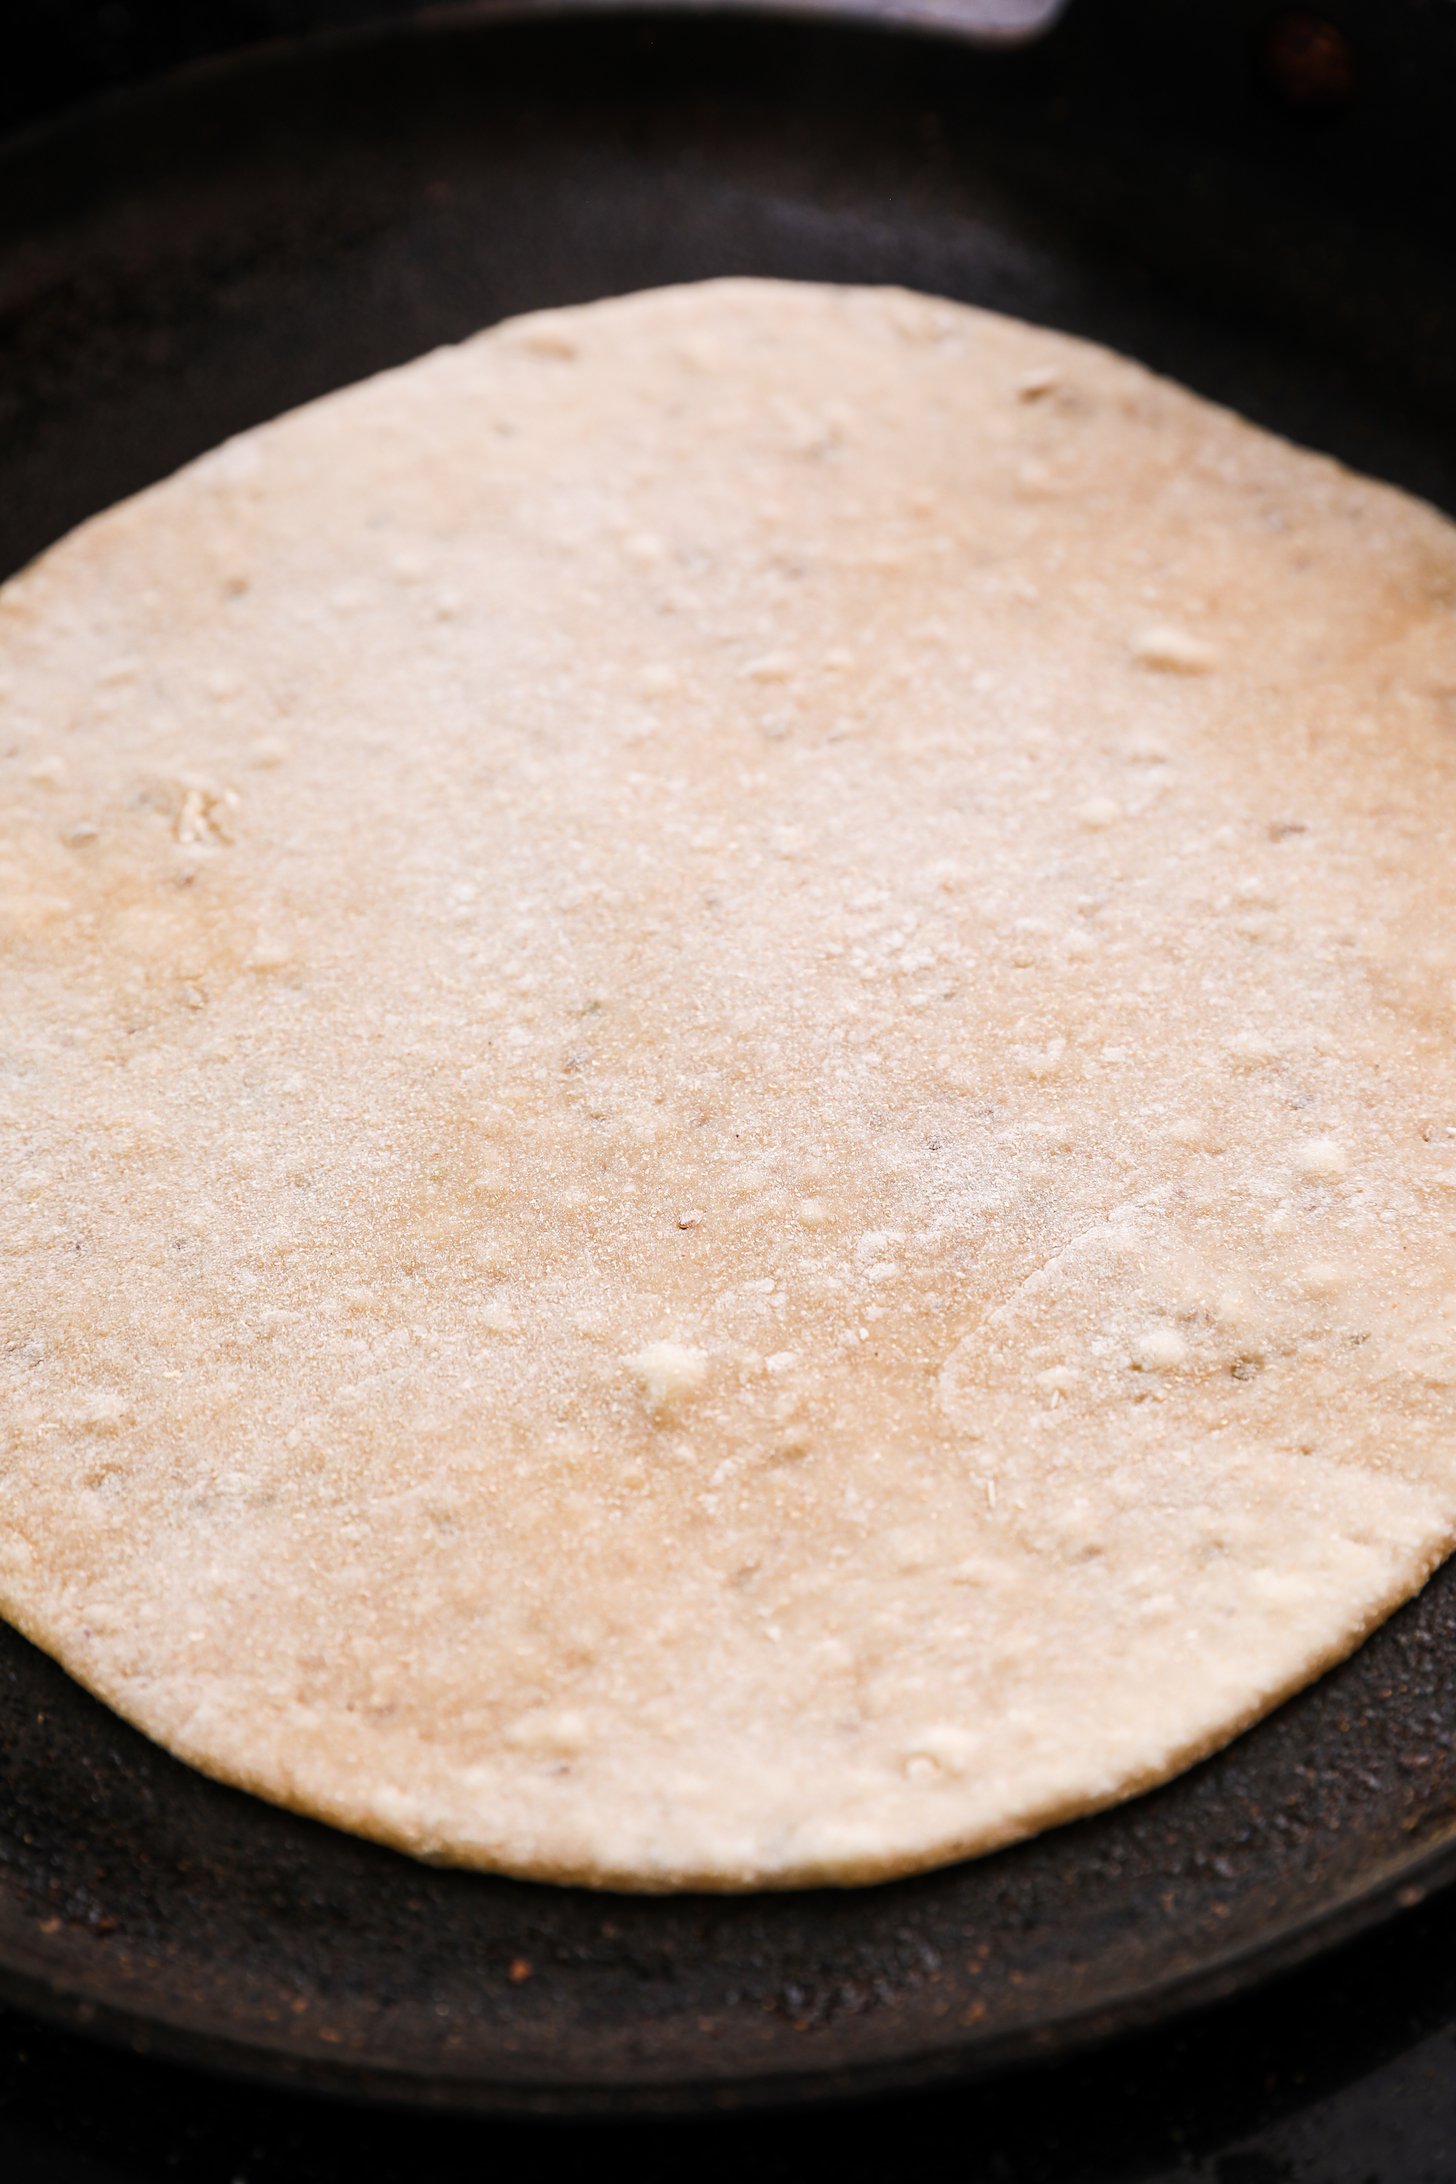 An uncooked roti on a flat pan.